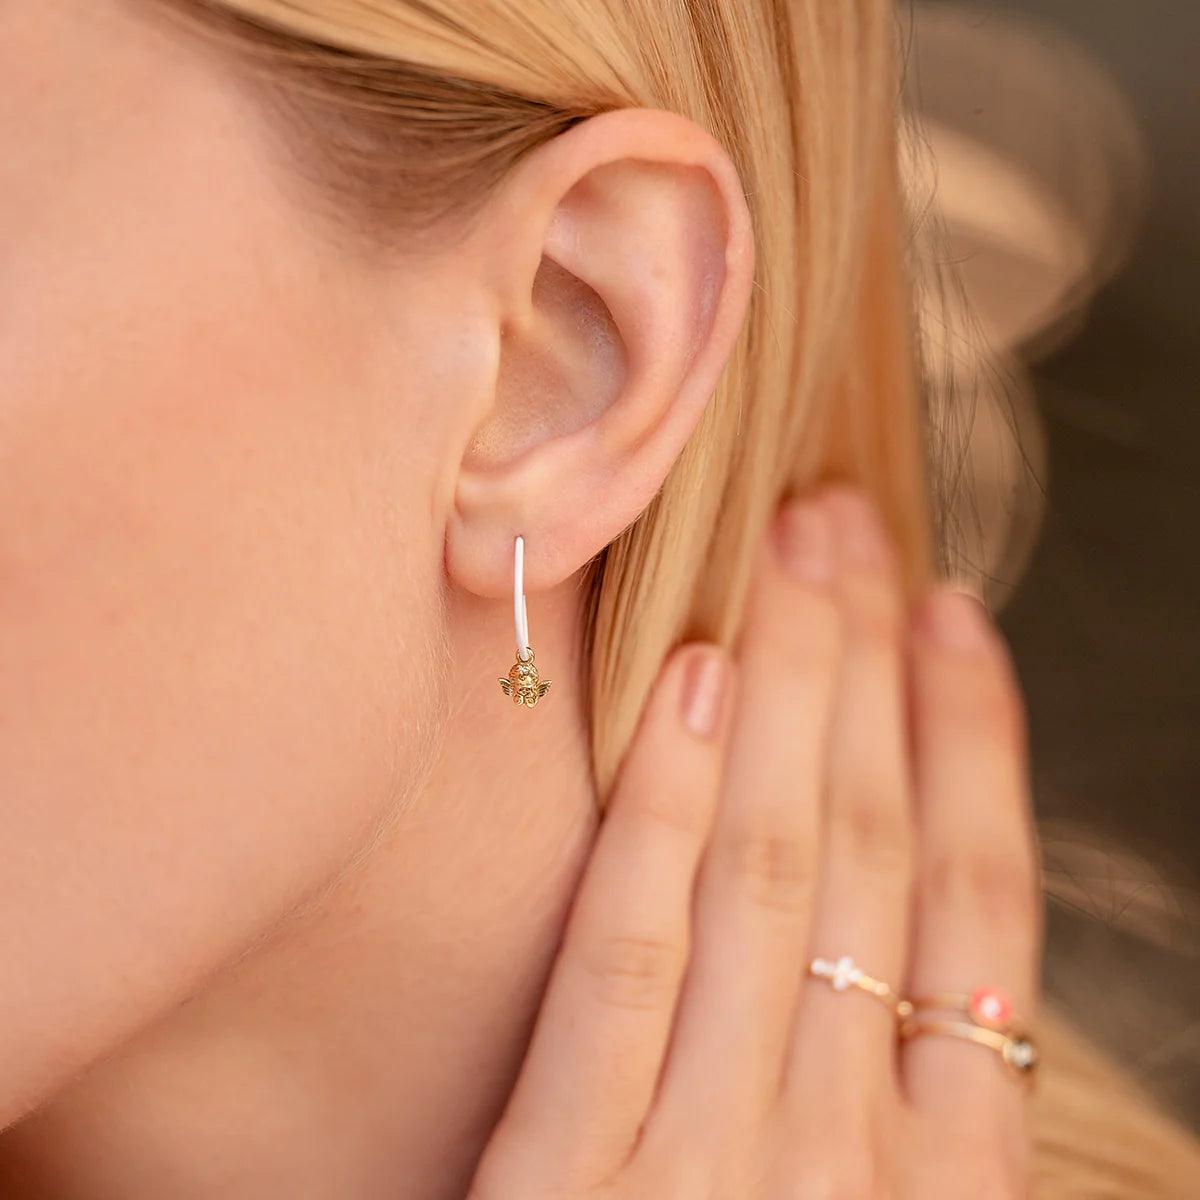 Mono Earring with 18kt gold angel and painted silver hoop - Moregola Fine Jewelry